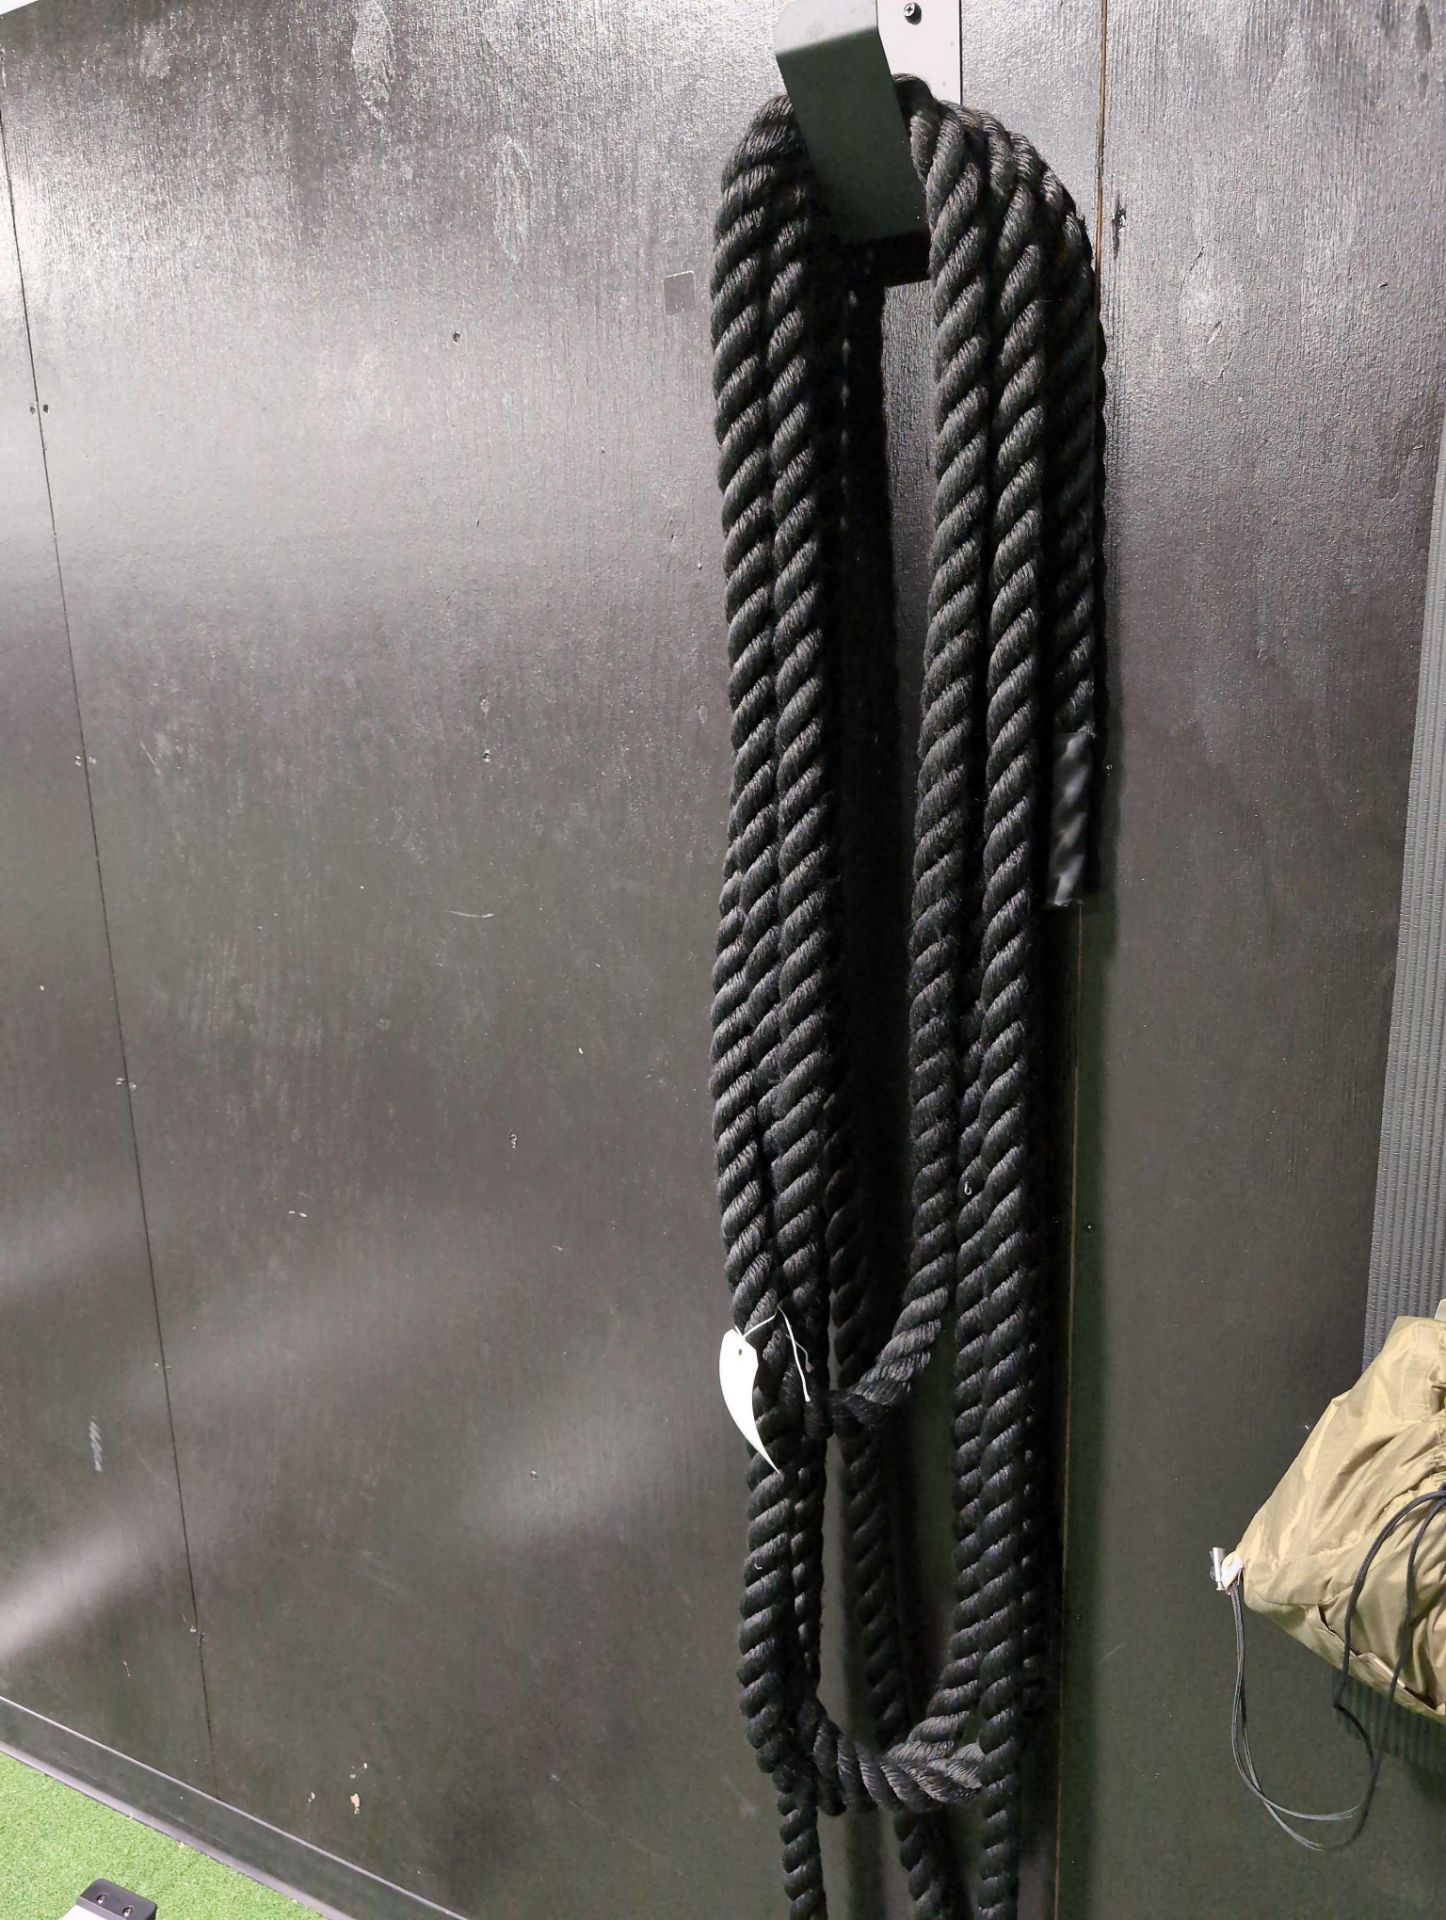 Exercise ropes